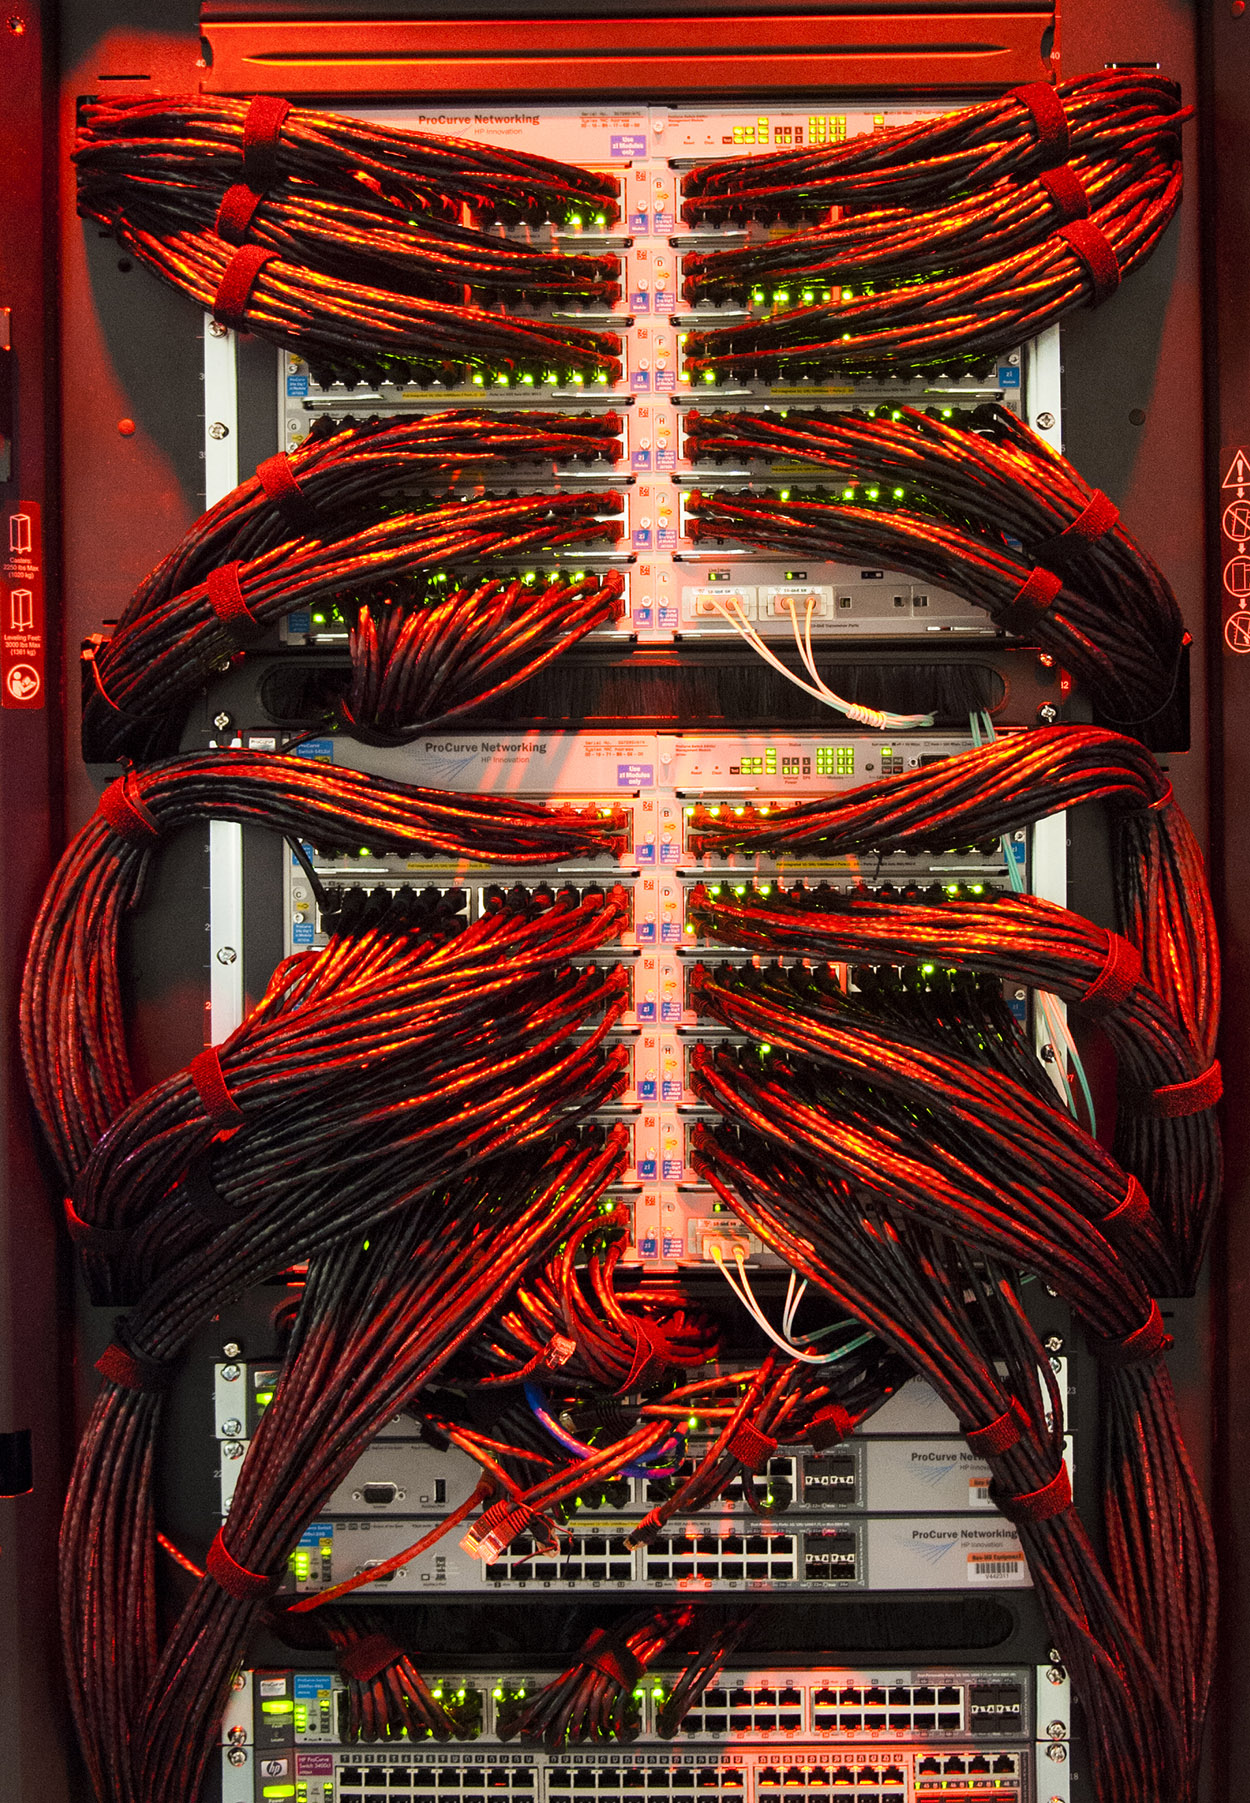 Electrical_wires_server_computers.jpg